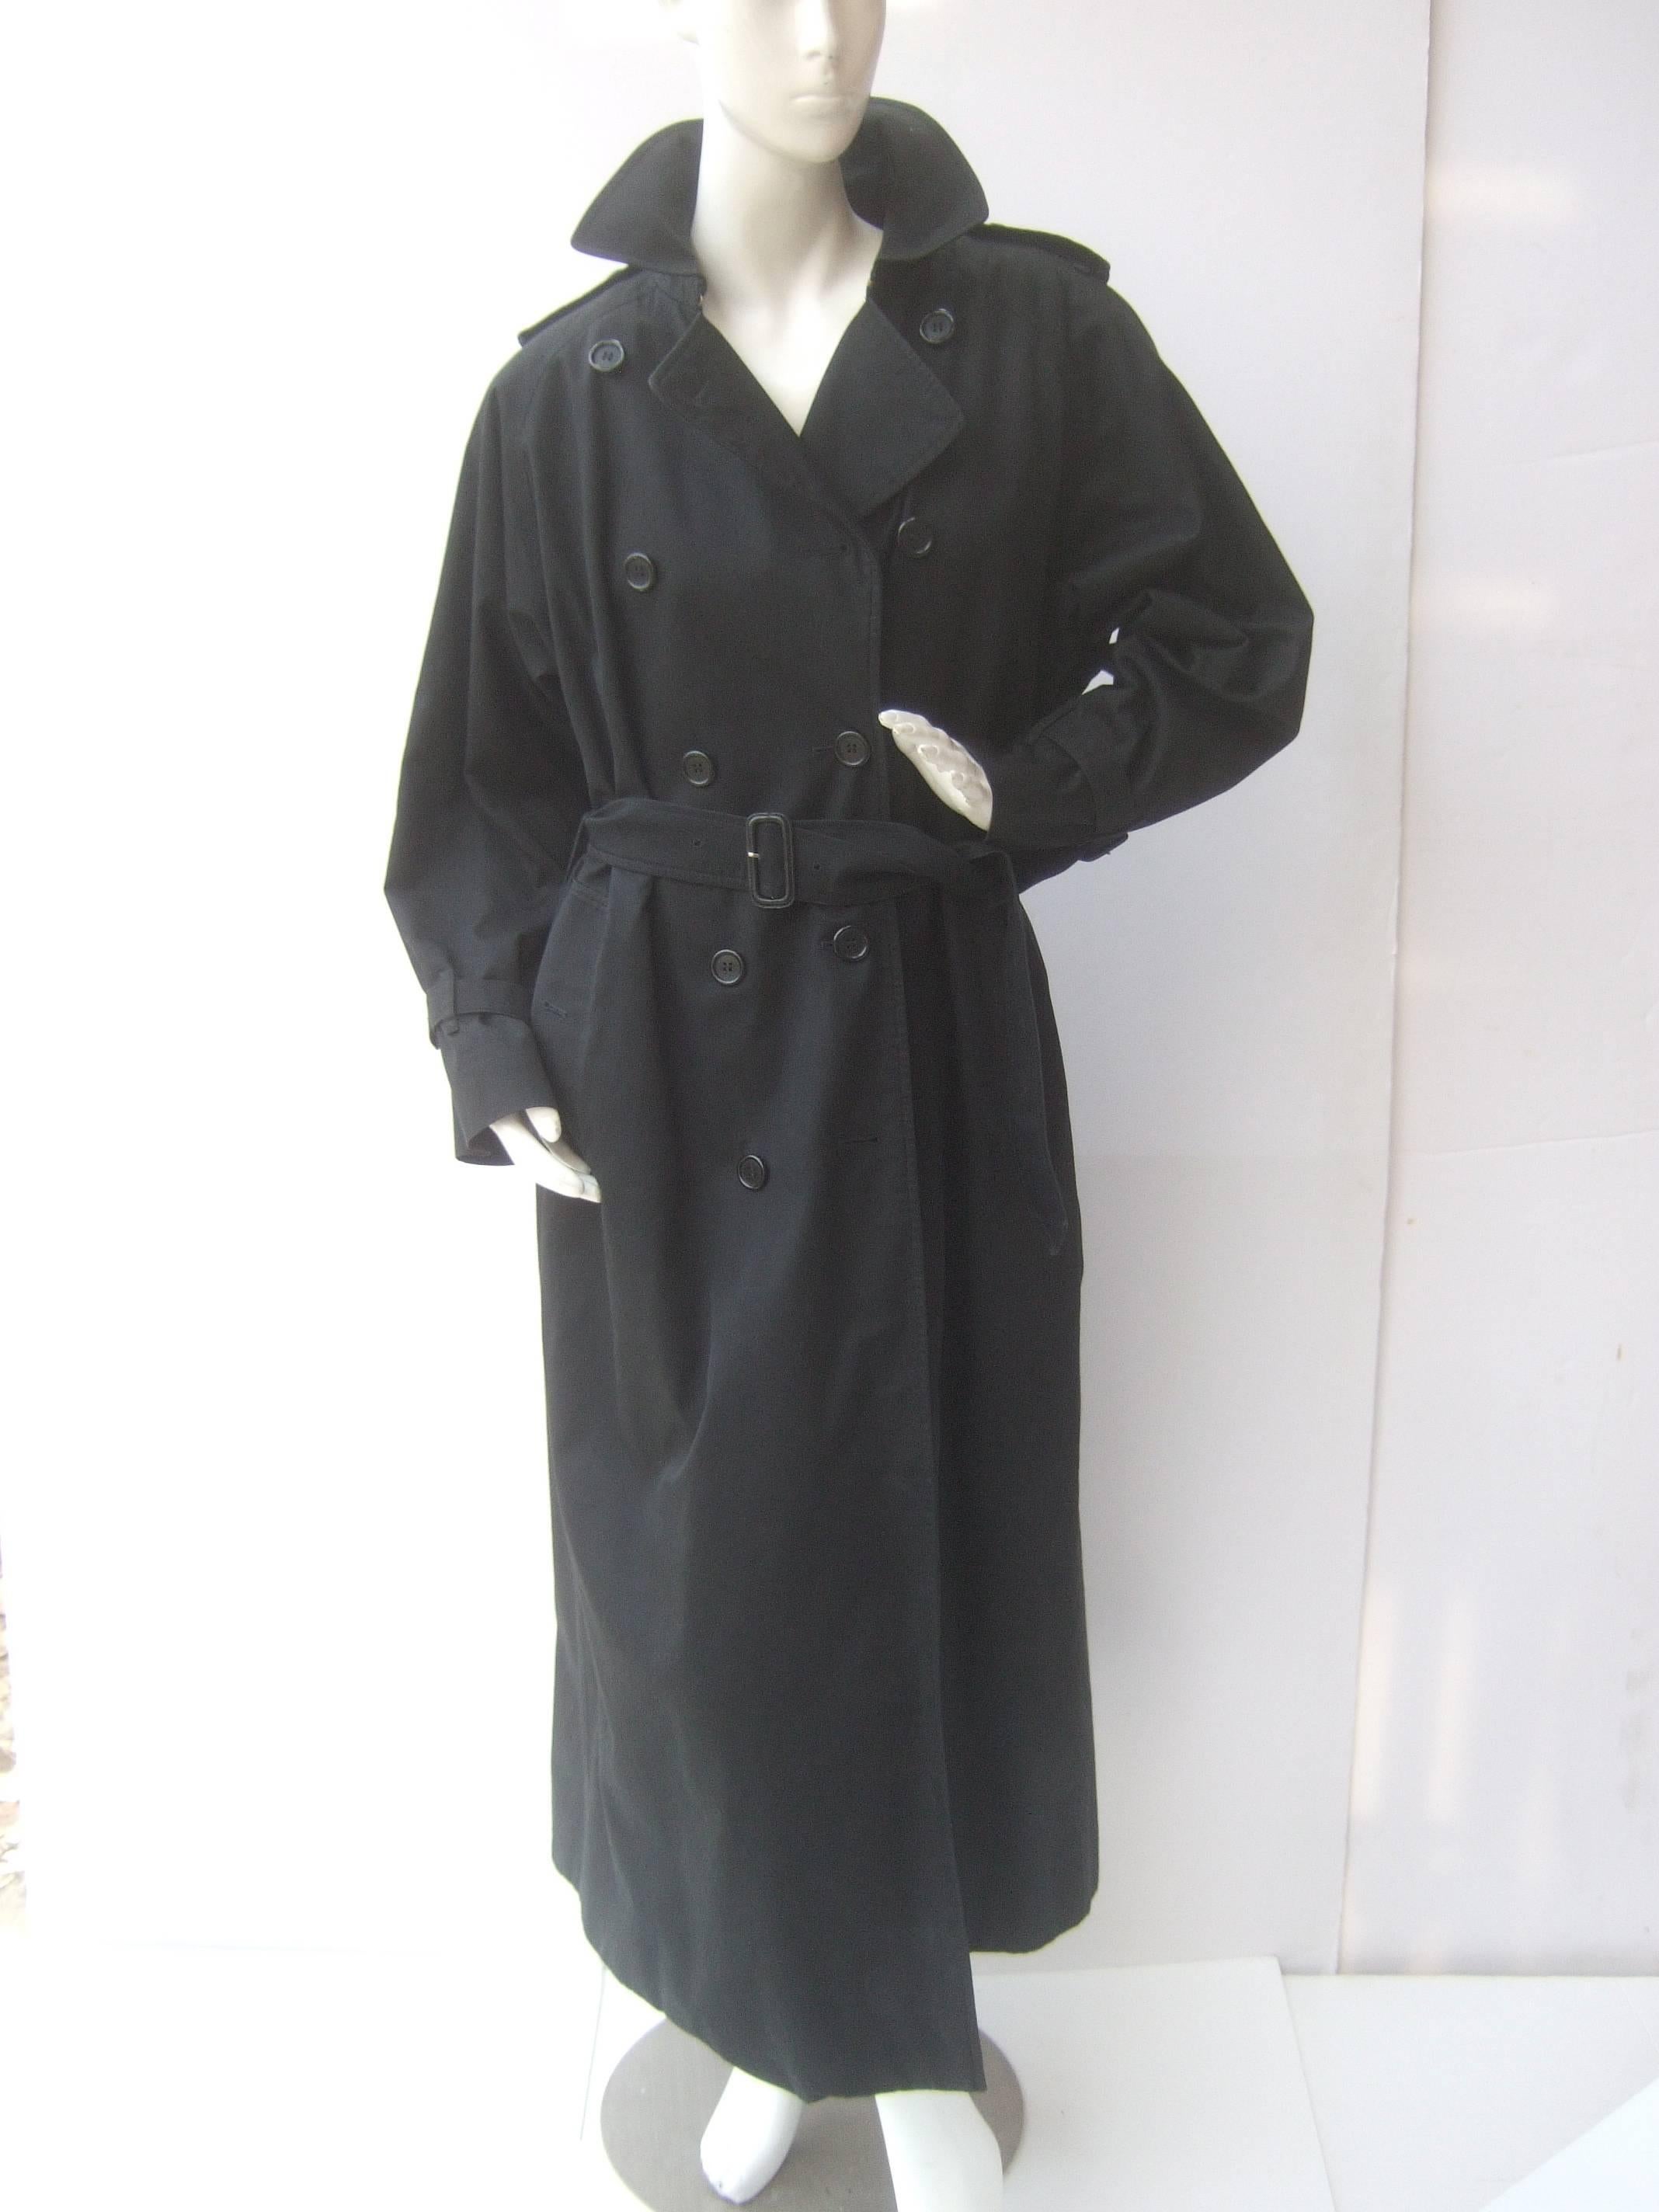 Vintage Burberry Trench - For Sale on 1stDibs